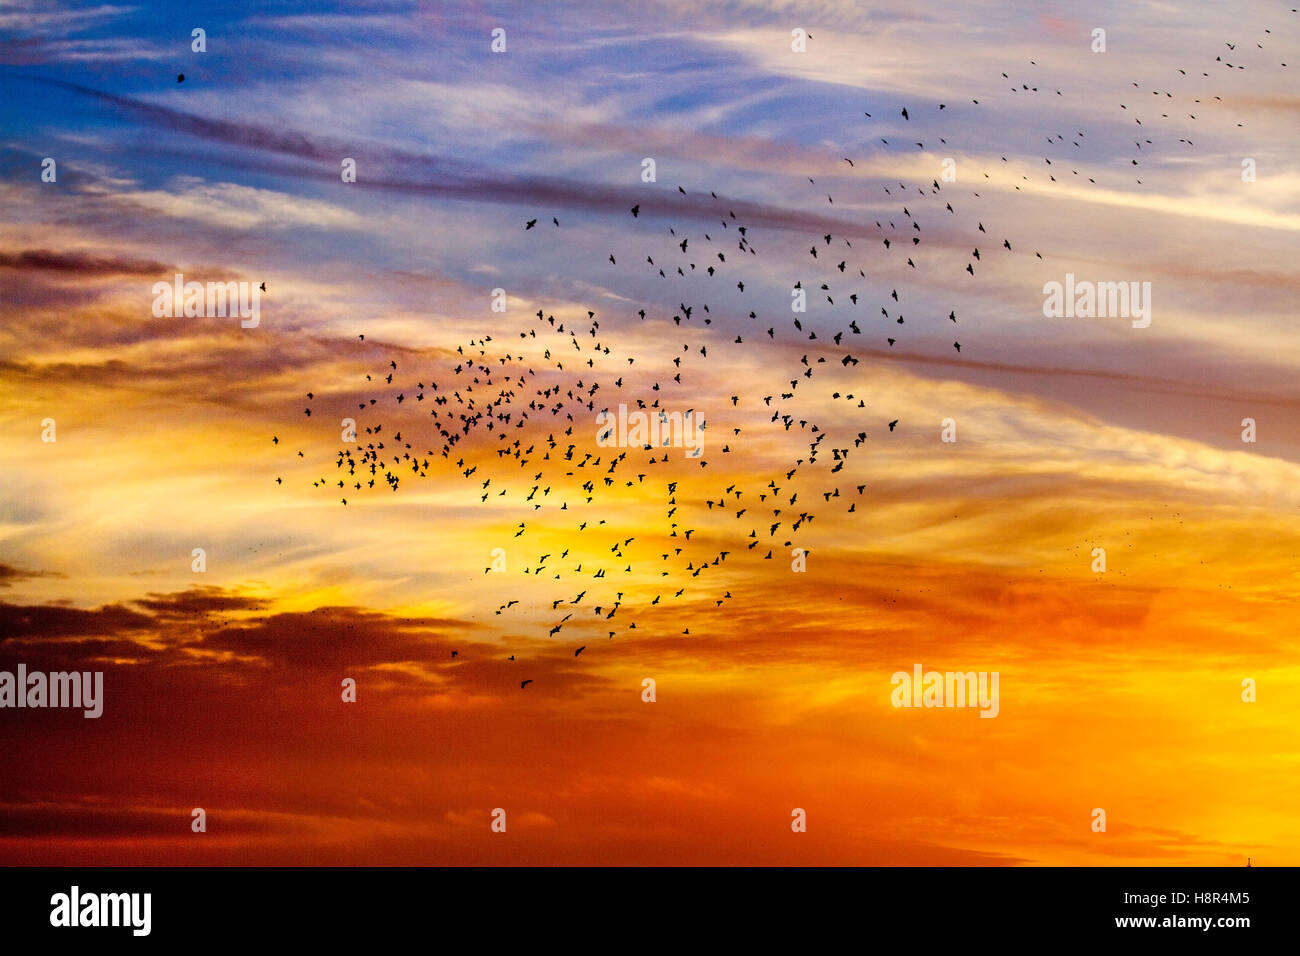 Birds in Flight, flying in the clouds at flocks of Starlings at Blackpool, Lancashire, UK. Starling murmuration at sunset. One of the great birding spectacles of the winter is the starlings' pre-roost assembly. Prior to settling down for the night, flocks of these gregarious birds swoop around until there is one enormous, swirling black mass. In the winter up to a million birds, swarm, swoop, shift, swirl and twirl, moving as one while performing amazing aerial acrobatics. this ballet at dusk is a pre-roosting phenomenon known as starling murmuration. Stock Photo